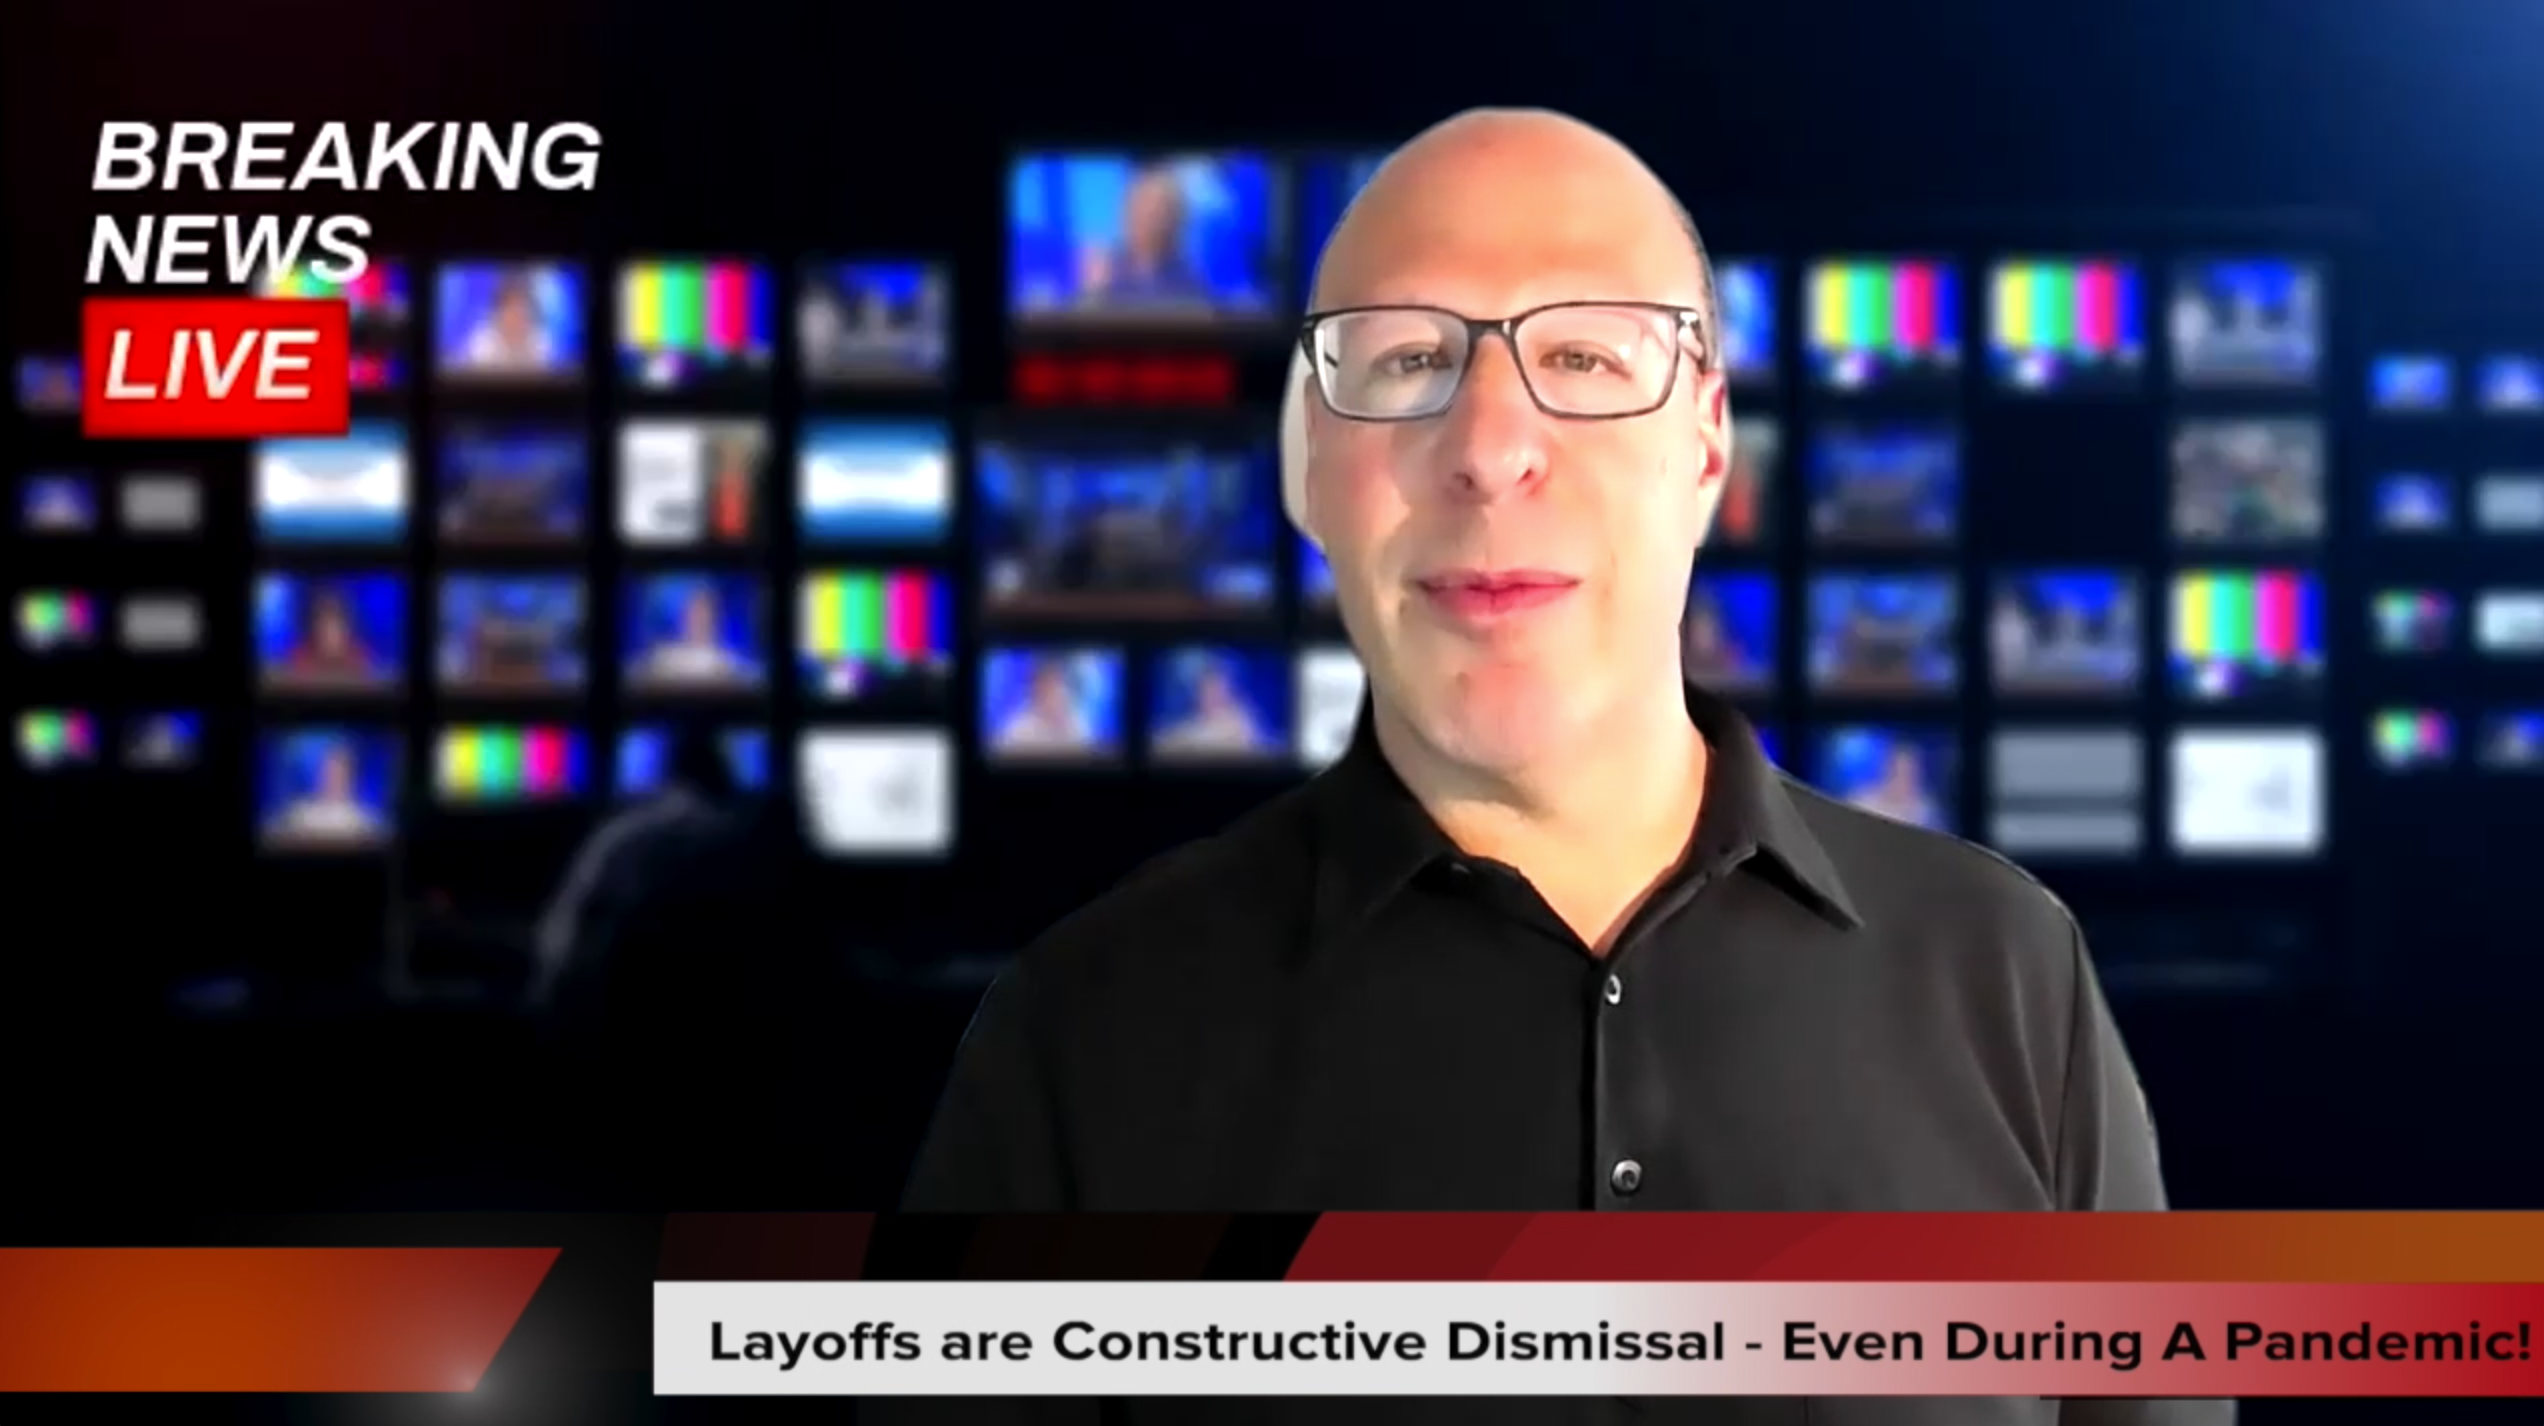 Breaking Employment Law News: Layoffs are Constructive Dismissals, Even During a Pandemic!